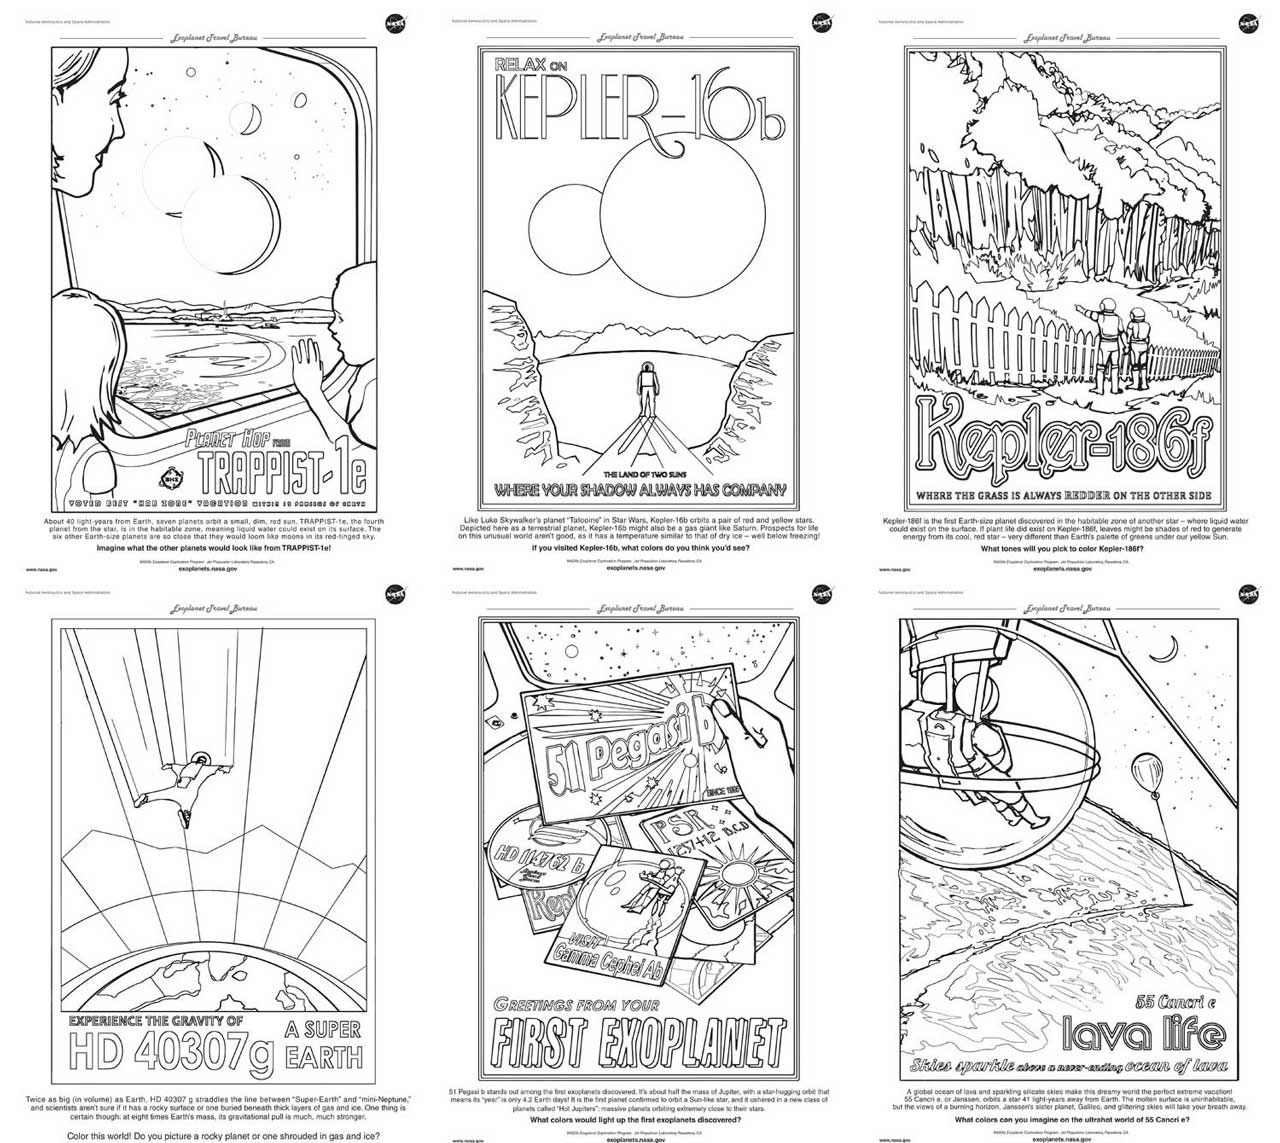 Collection of coloring pages based on futuristic galactic travel destinations.